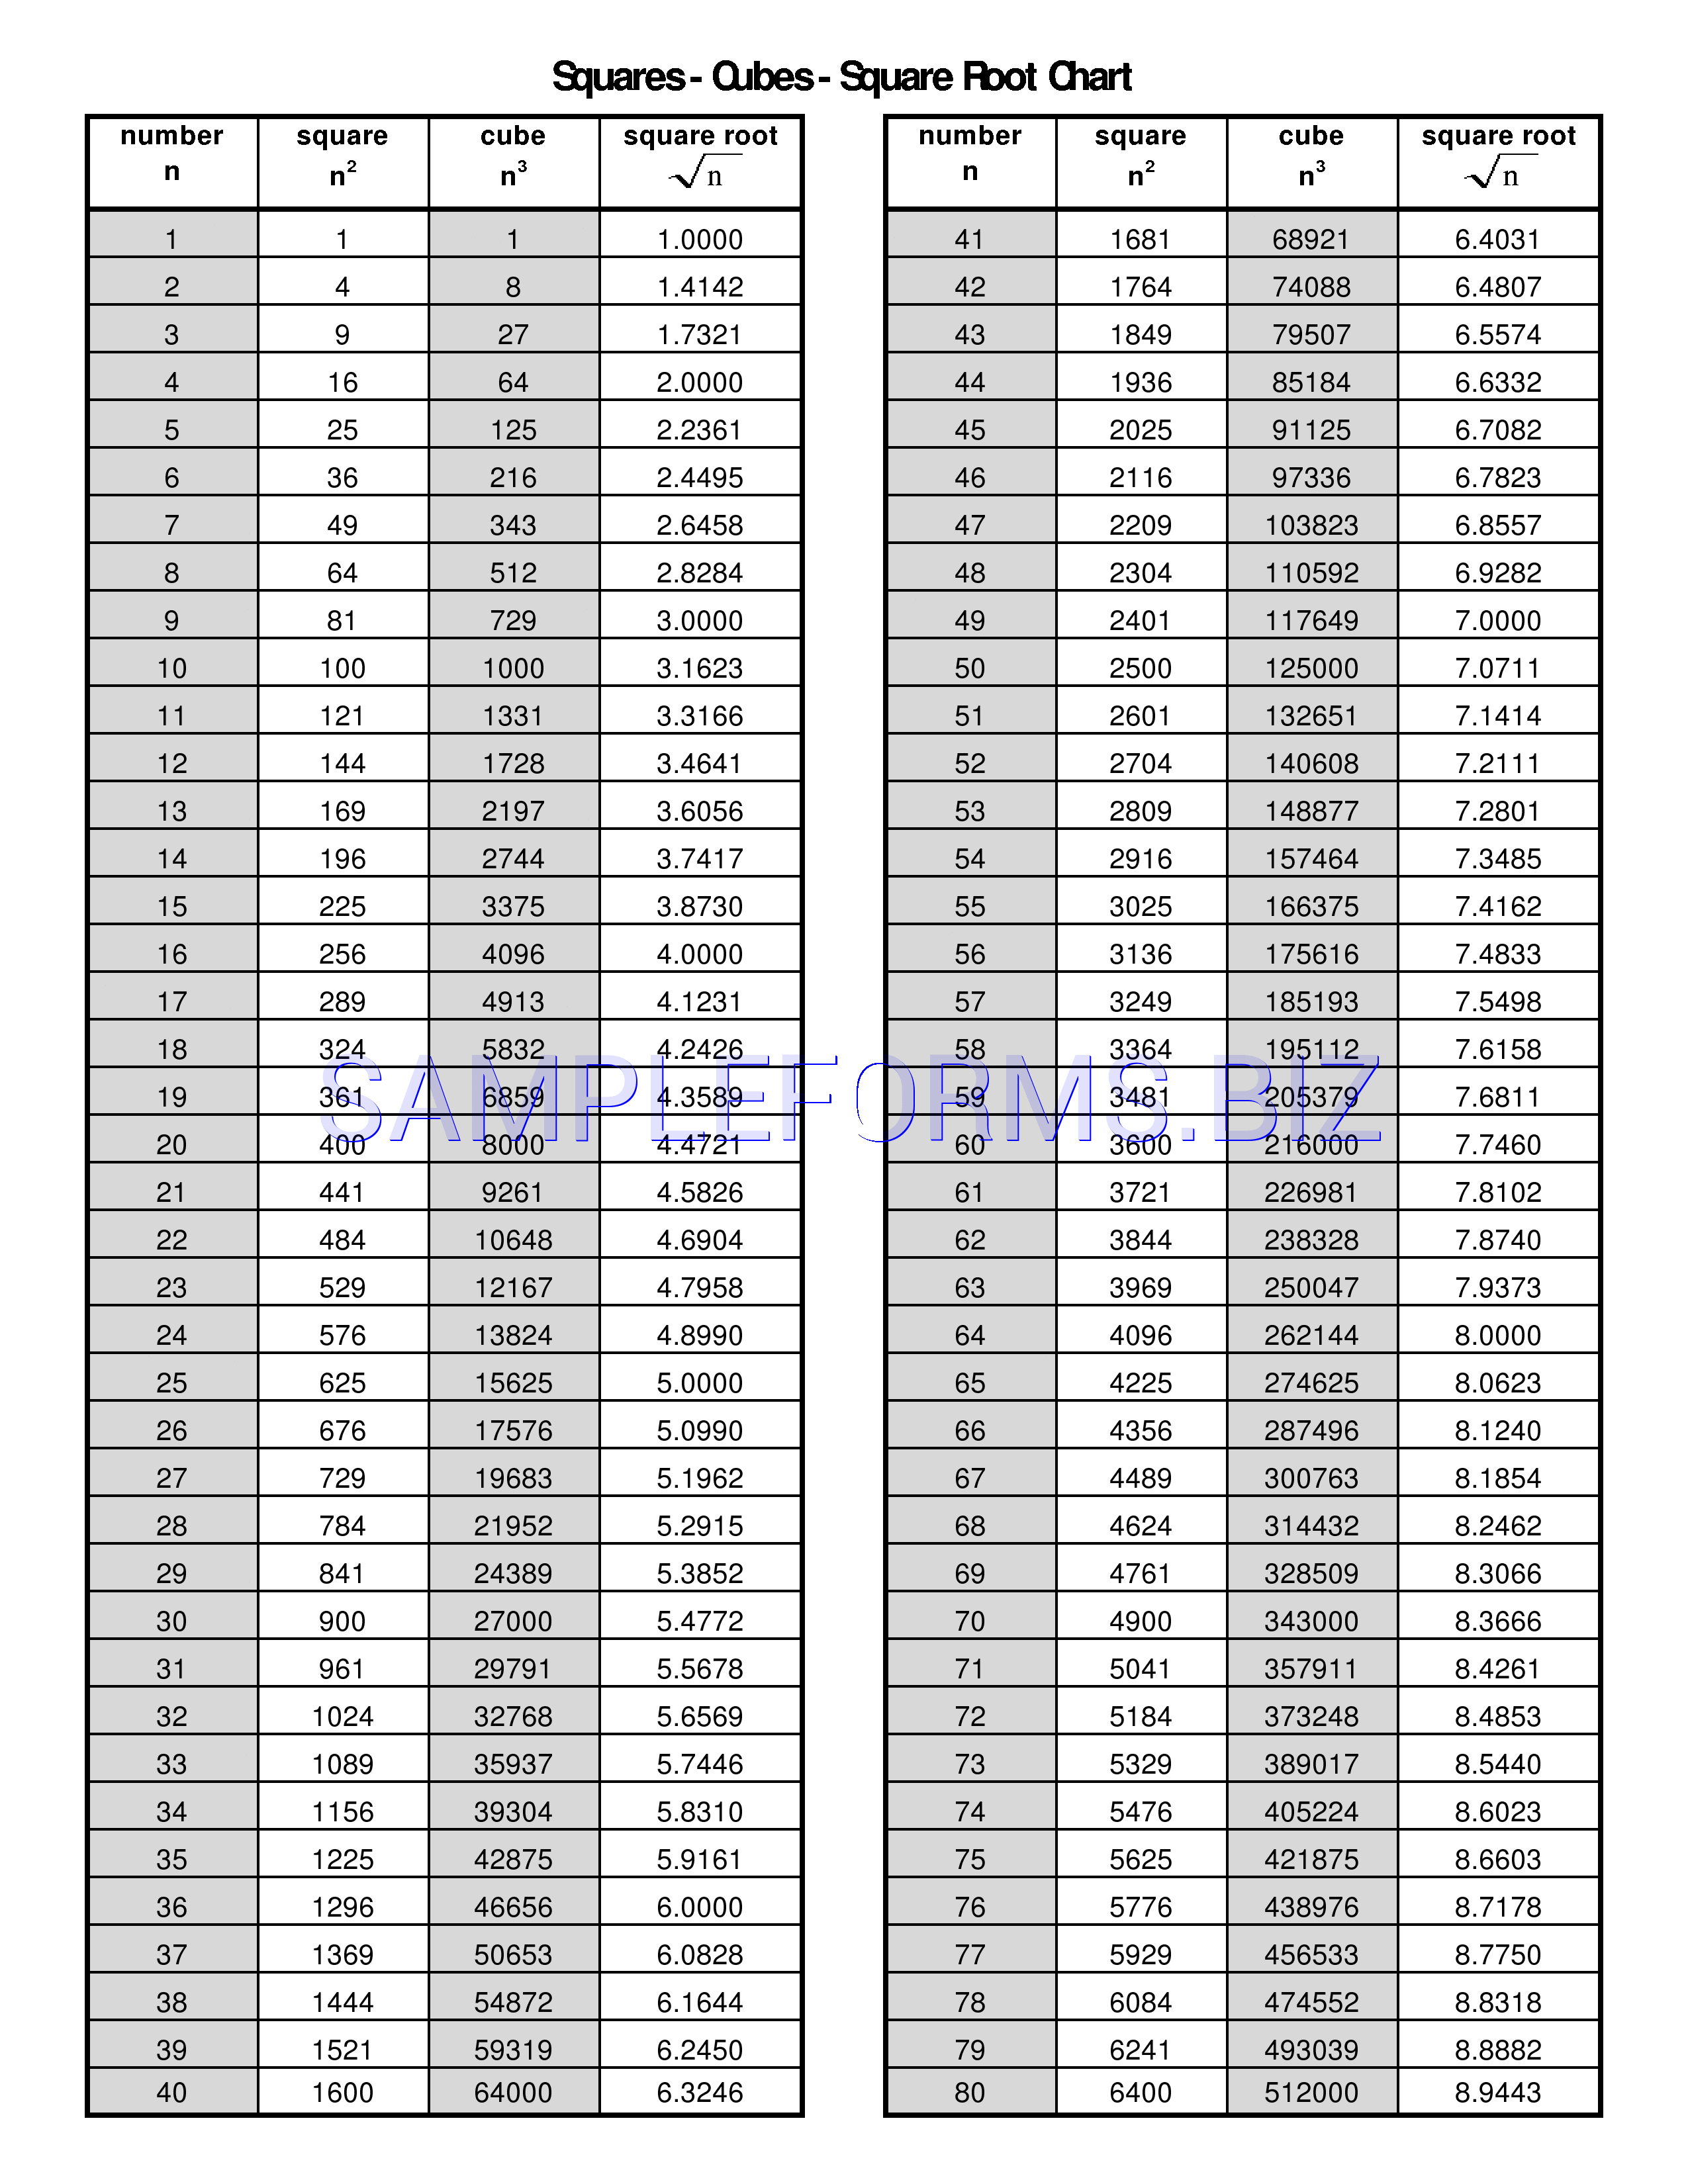 A Square Number Chart